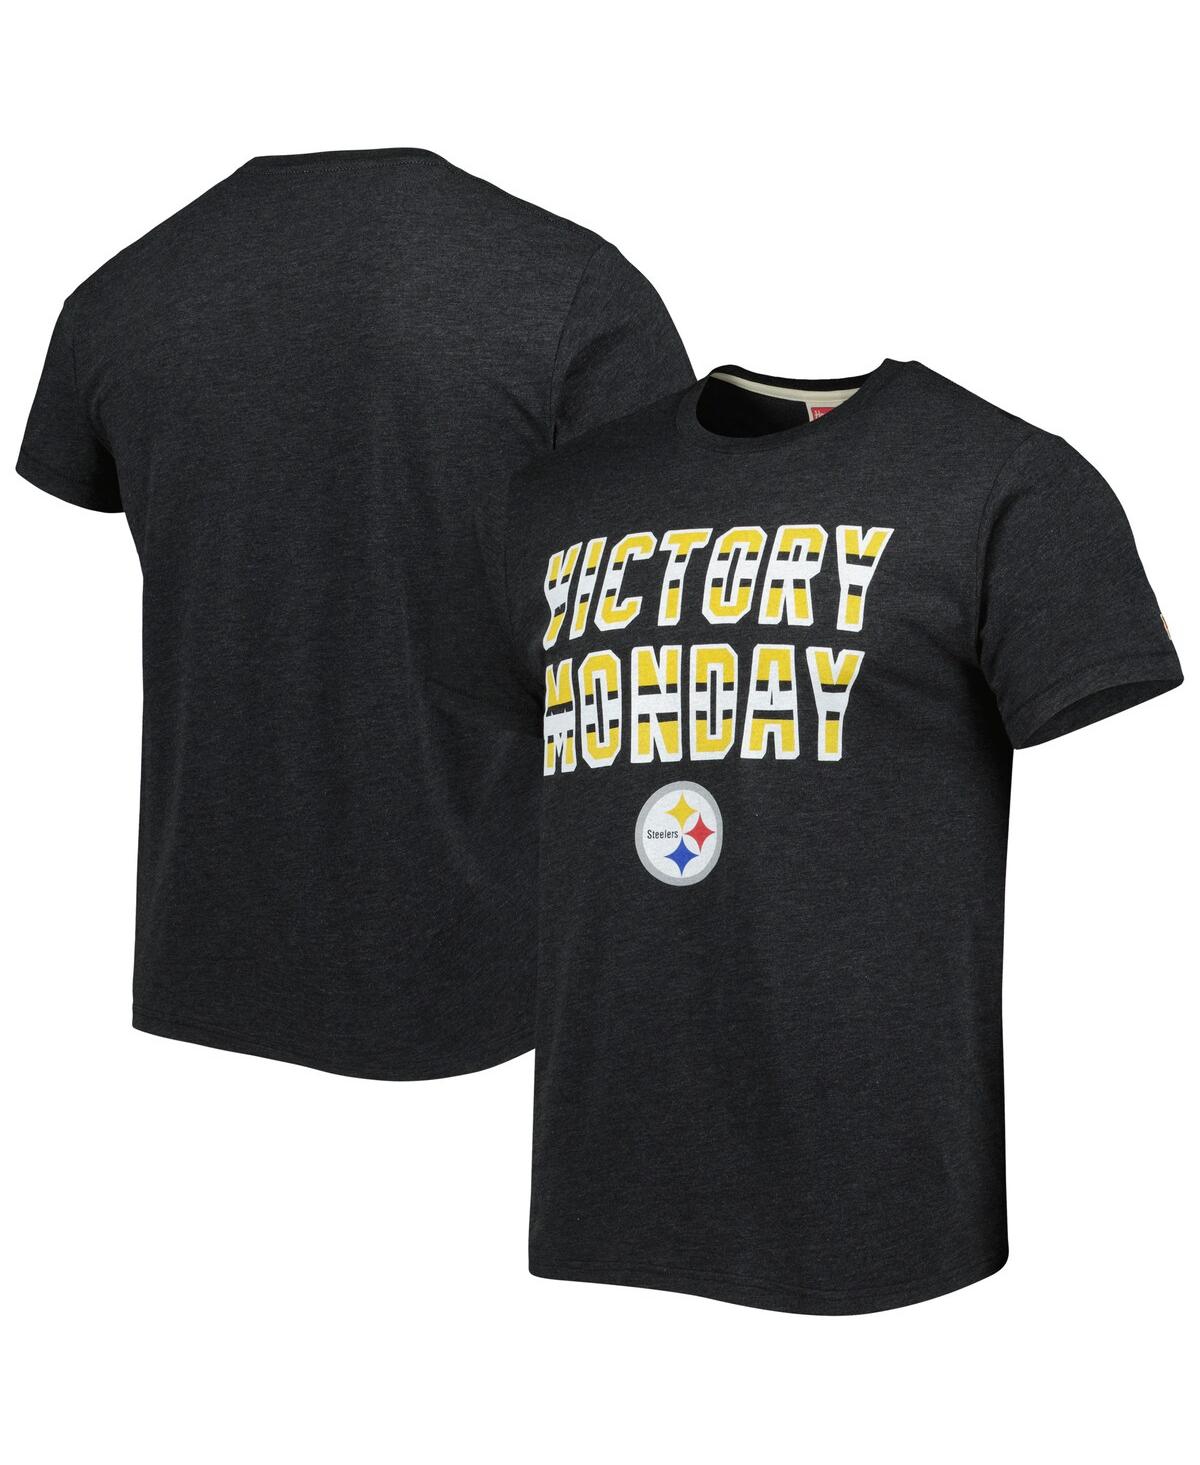 Men's Homage Charcoal Pittsburgh Steelers Victory Monday Tri-Blend T-shirt - Charcoal